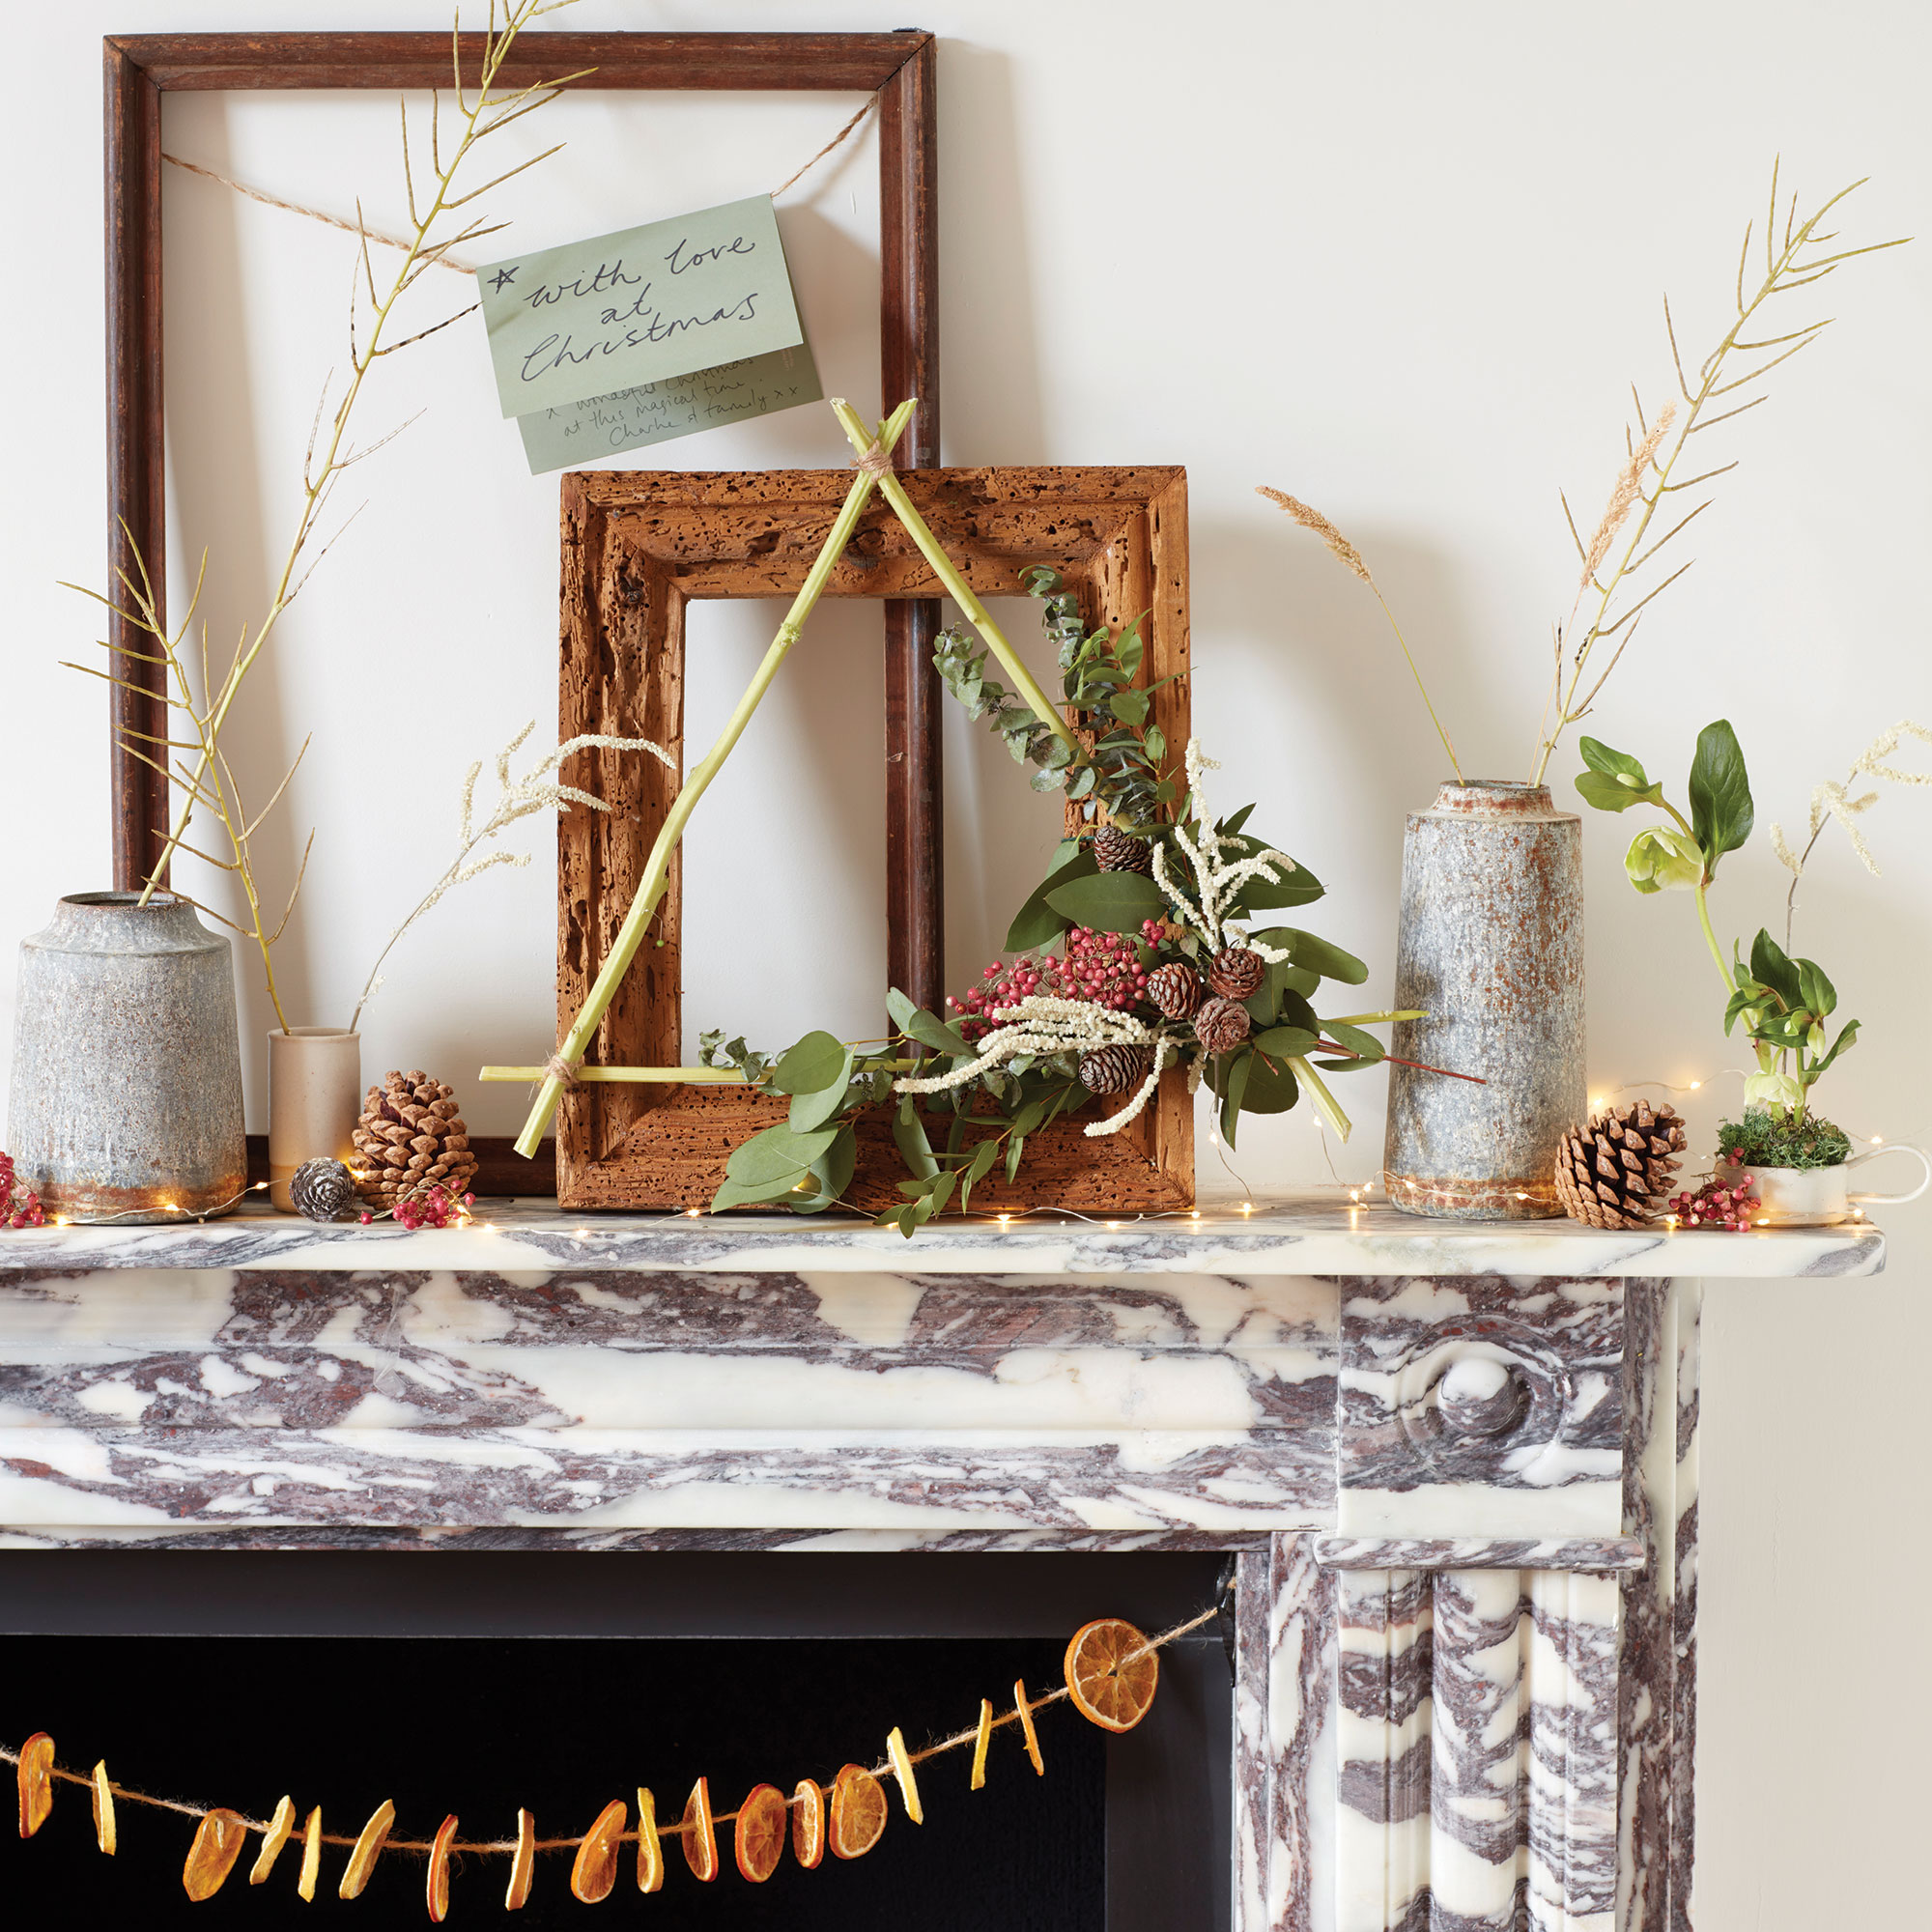 Home Star Staging 6 Simple Seasonal Decor Tips - Home Star Staging